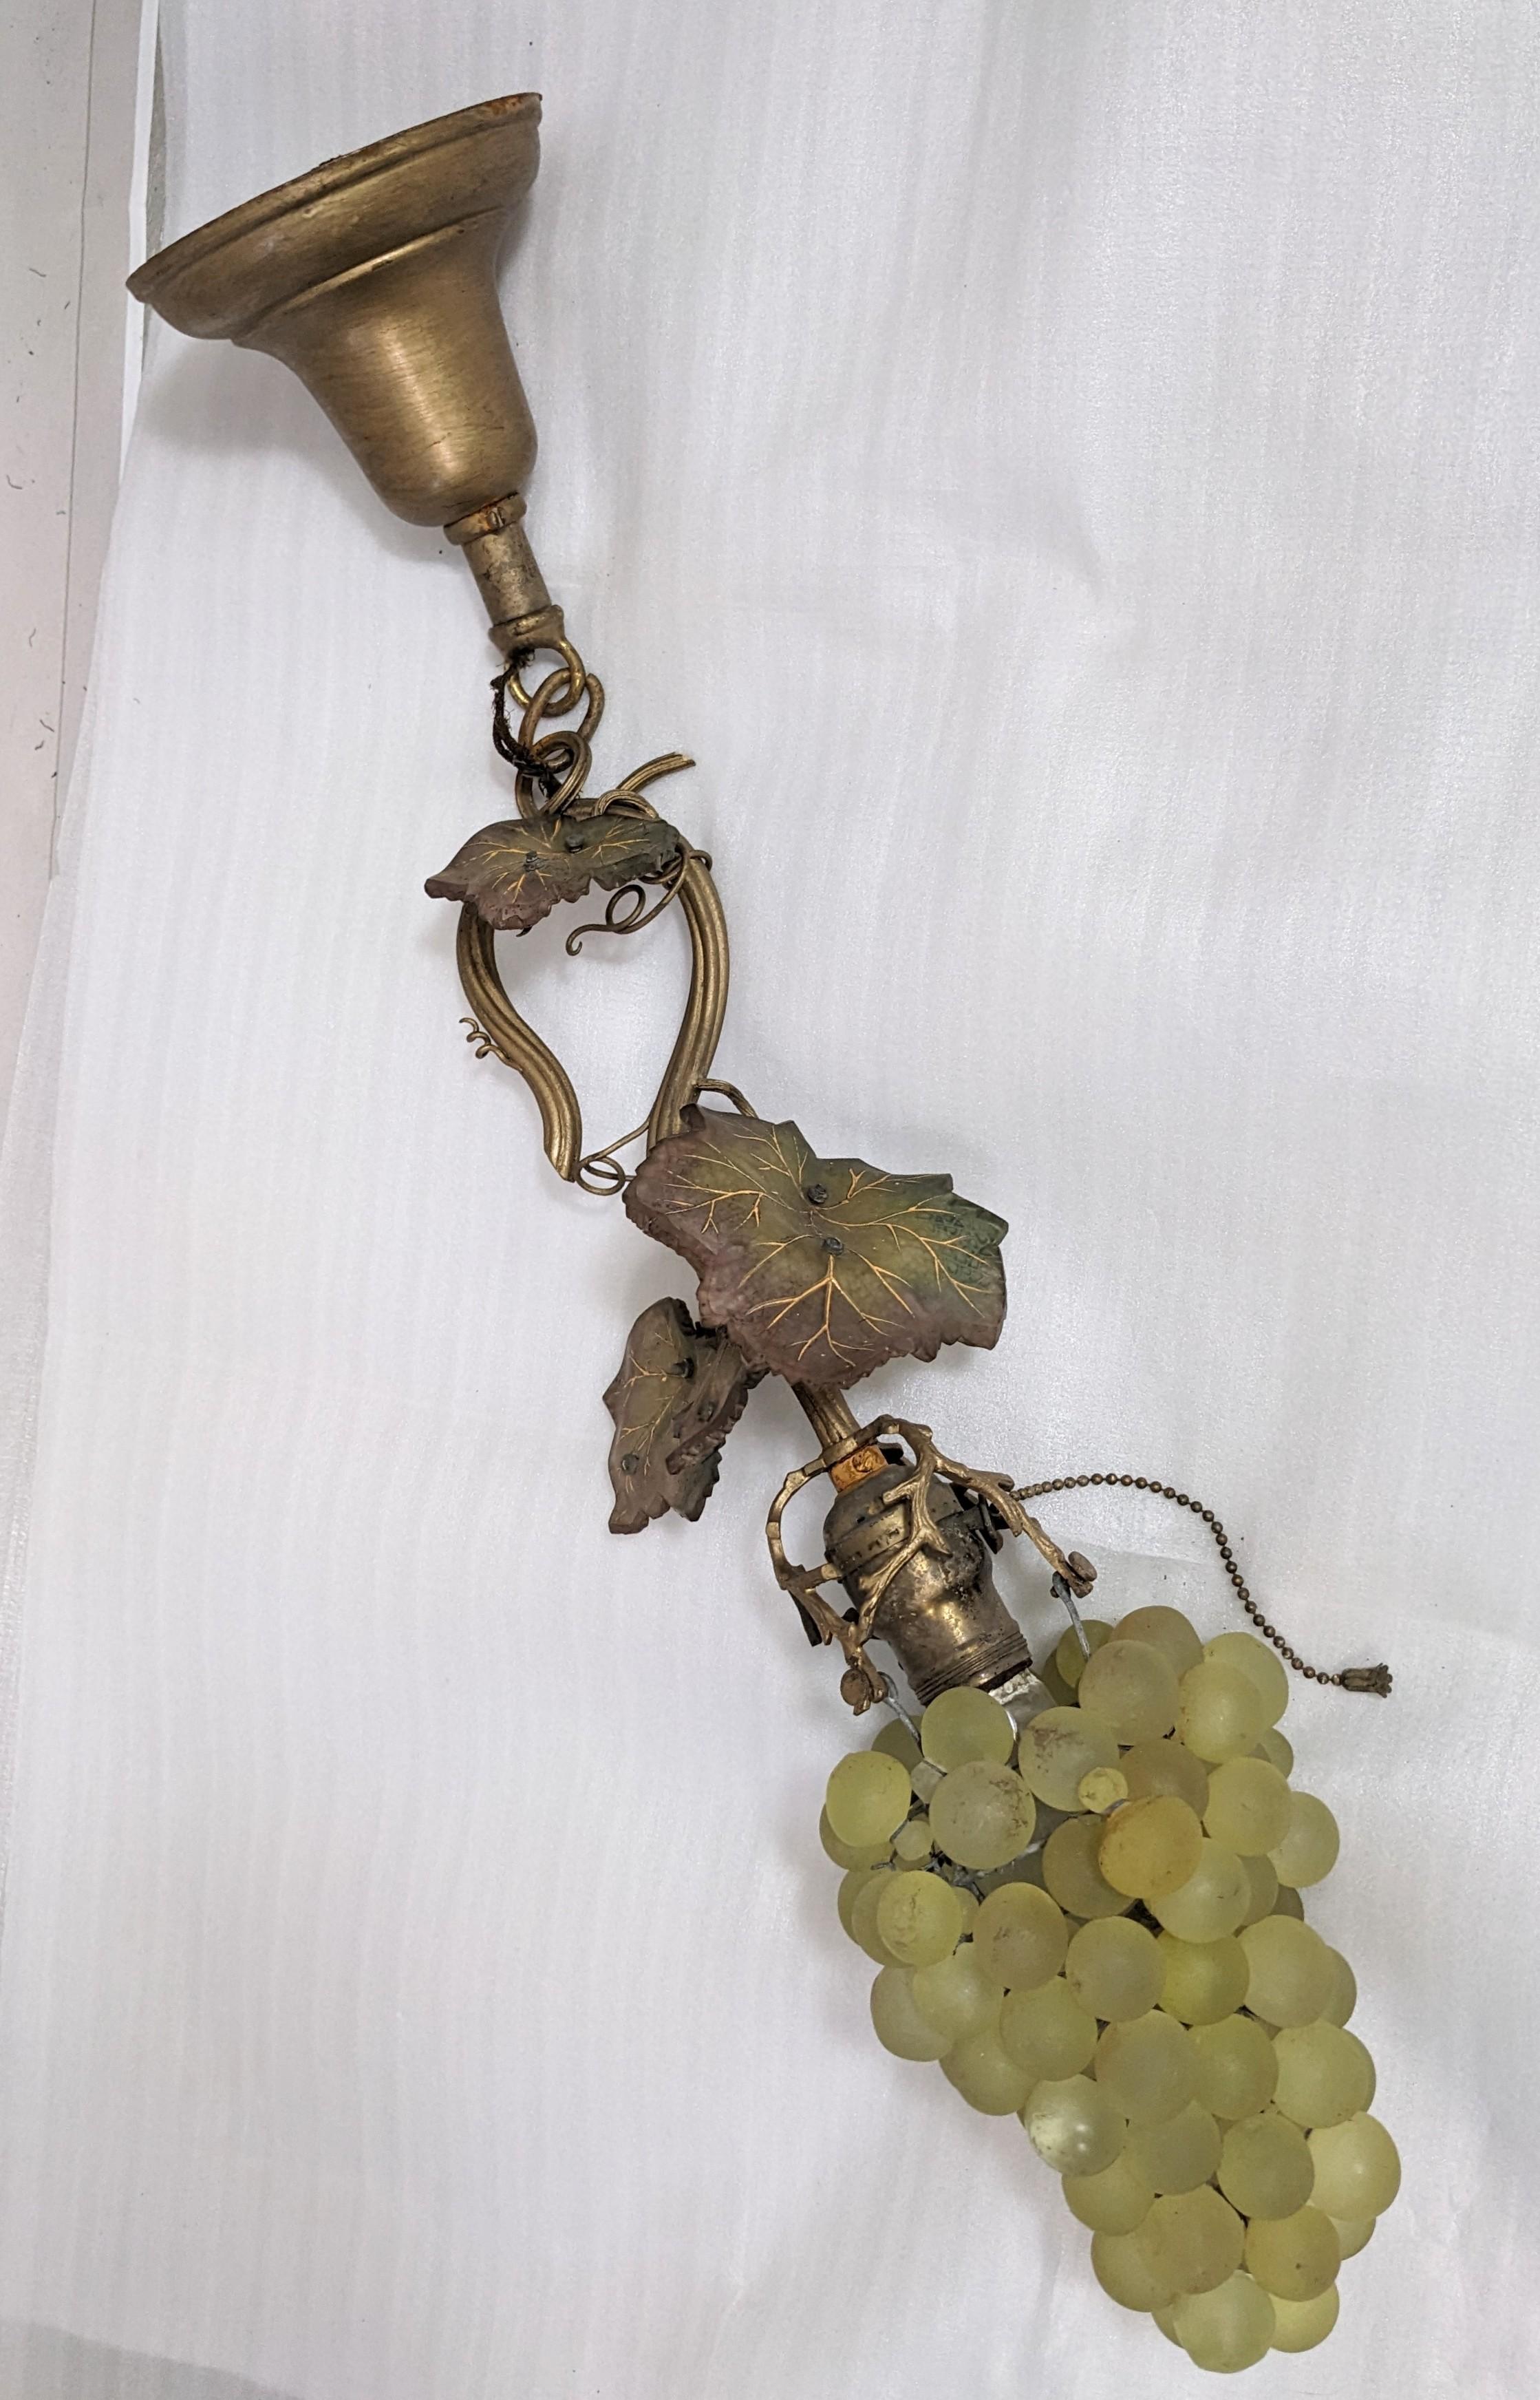 Lovely Art Nouveau Art Glass Grape Pendant Light of European origin with 2 sets of art glass grape clusters in yellow and uranium green glass. Elaborate swirling metal work with vines and Art Glass molded leaves with gold hand painted highlights.